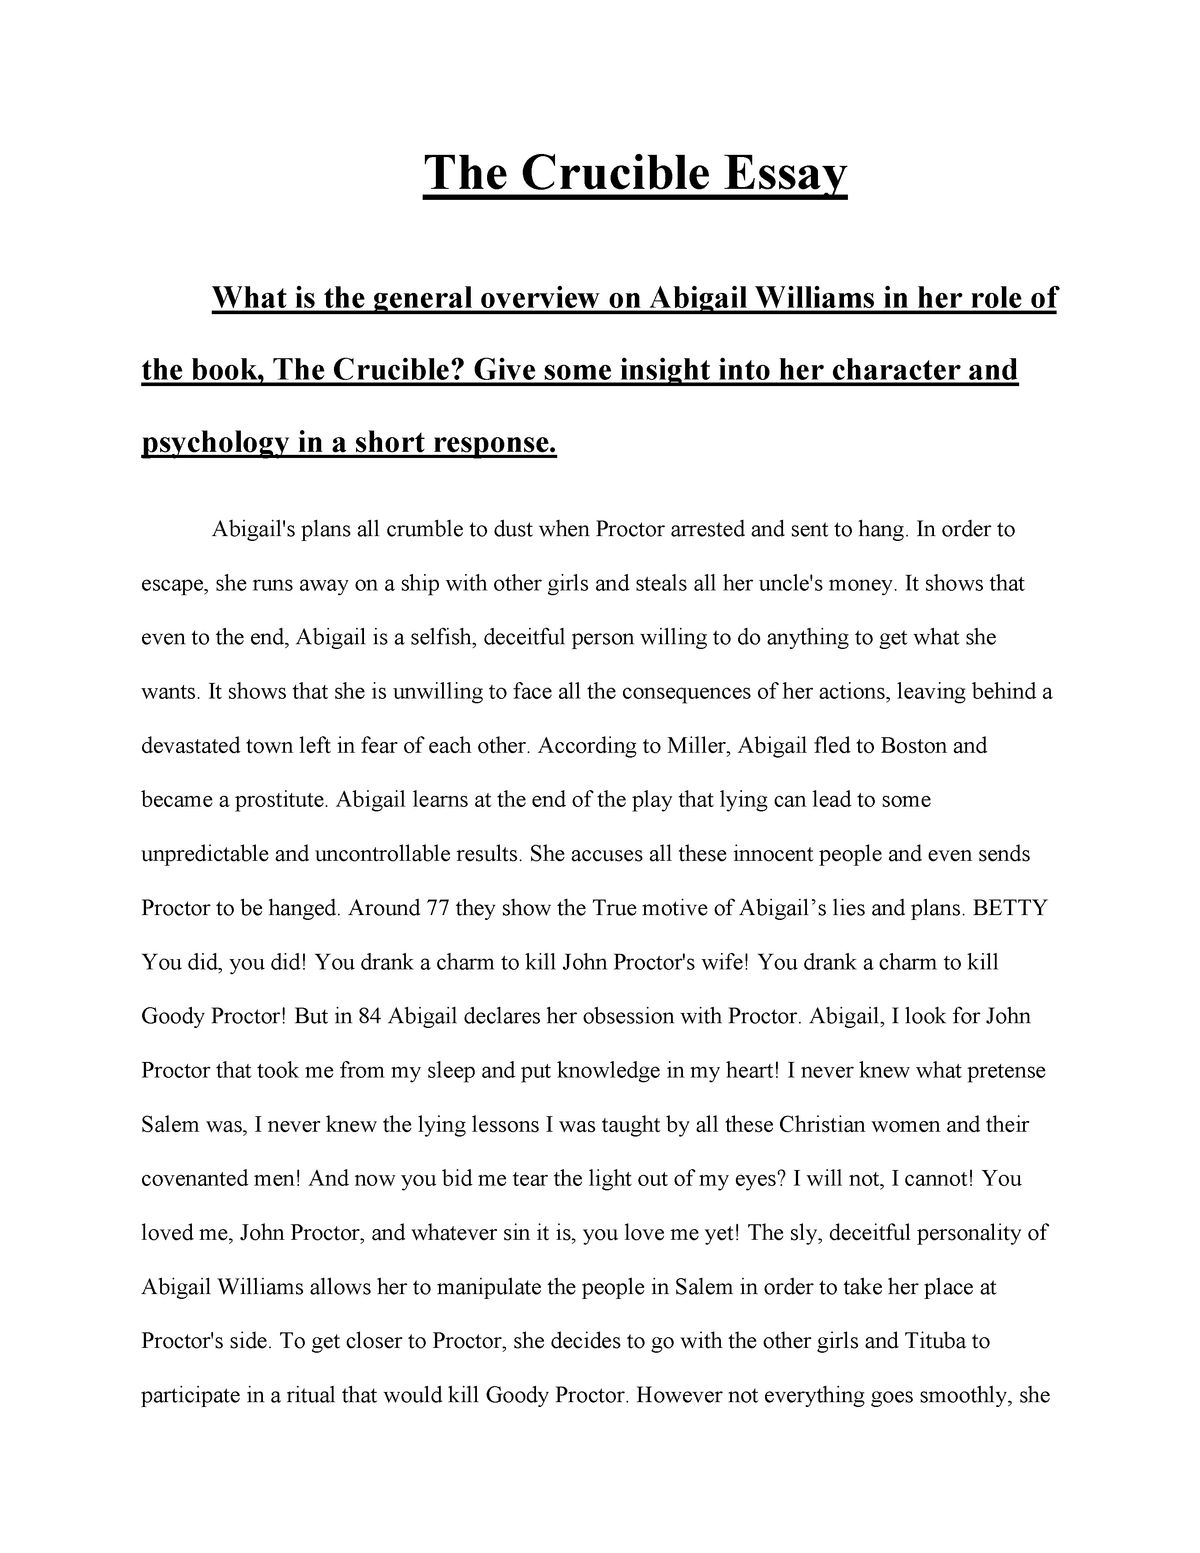 essay on reputation in the crucible